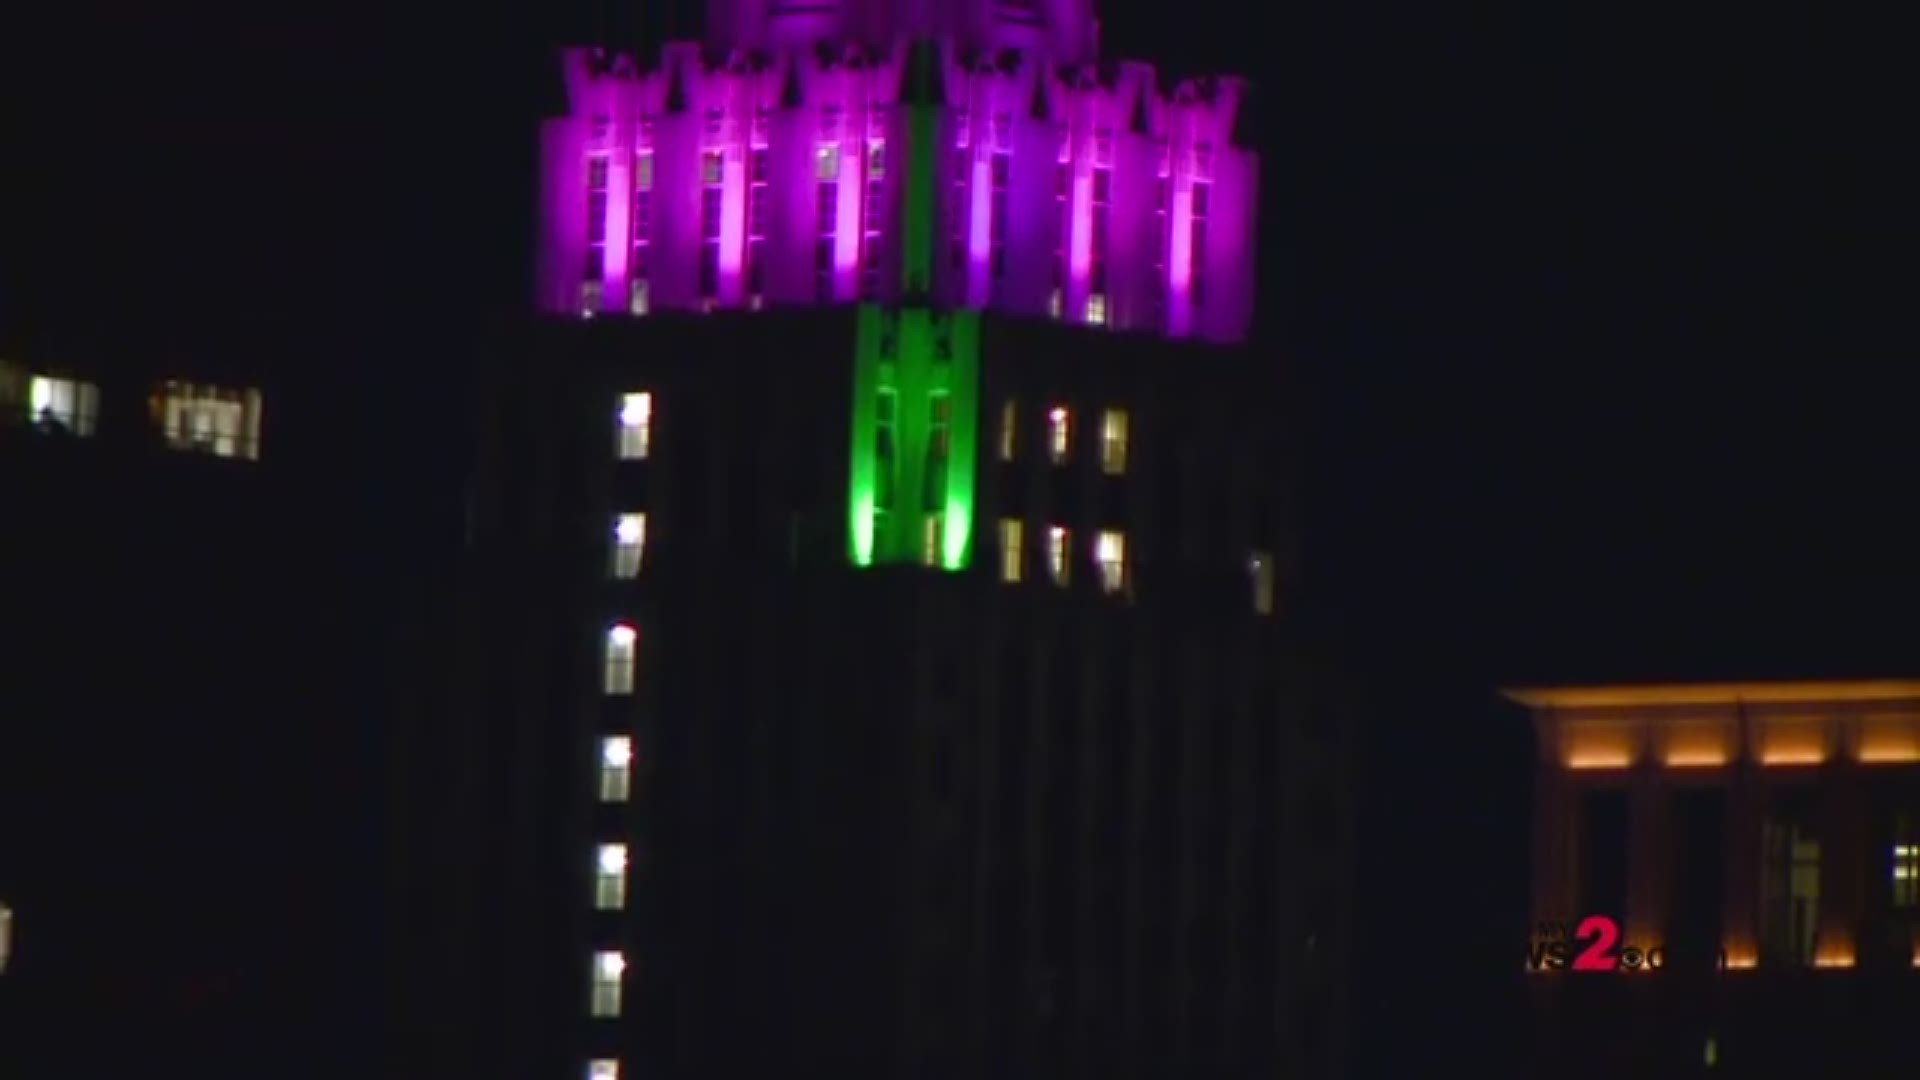 LIGHT IT UP PINK! Check it out! The Historic Reynolds building in downtown Winston-Salem is lit up in pink for Breast Cancer Awareness Month!